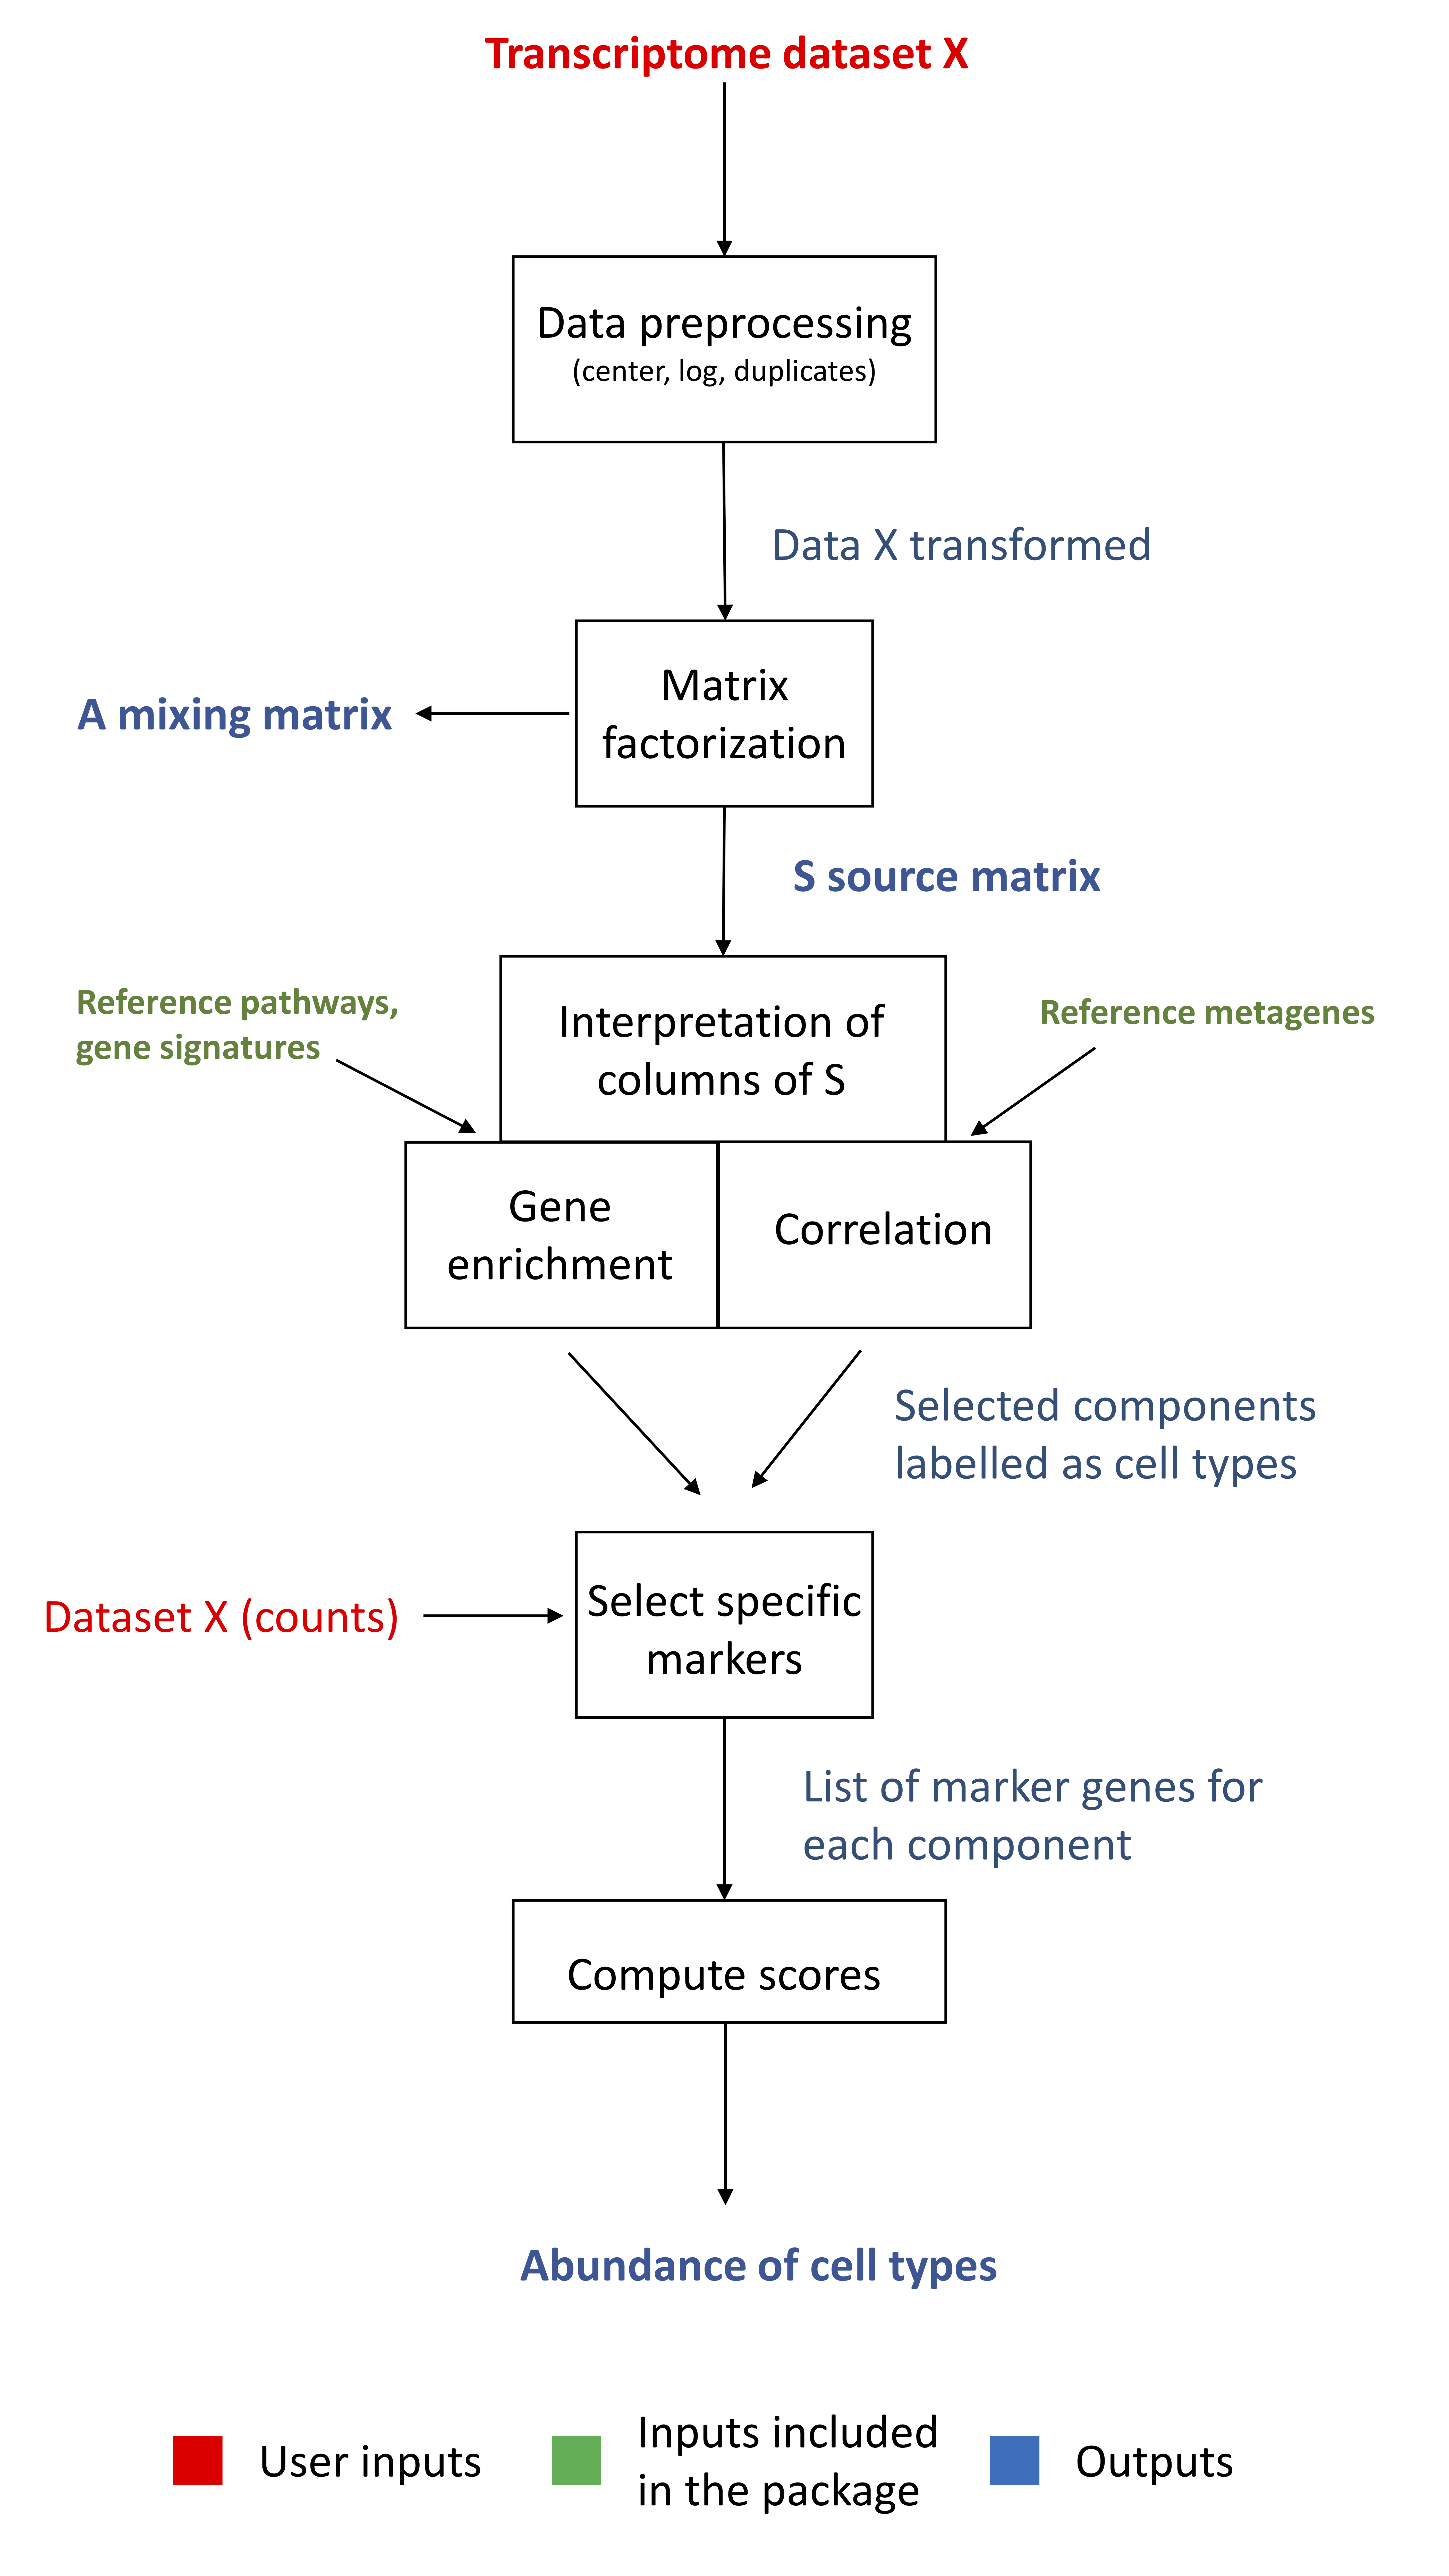 Flowchart of DeconICA method. In this flowchart steps of DeconICA are represented as boxes. Each operation corresponds to one or multiple functions in the R package. Input data X (red) is preprocessed and then decomposed into components. Interpretation of the components is performed with correlation or gene enrichment analysis (using reference materials - green). For components labeled as cell types or other important factors, abundance can be estimated using top genes of each component and computing average of counts in a non-log scale of those genes. Main outputs are ( in blue), the S component matrix, labeled components, and their abundance scores.